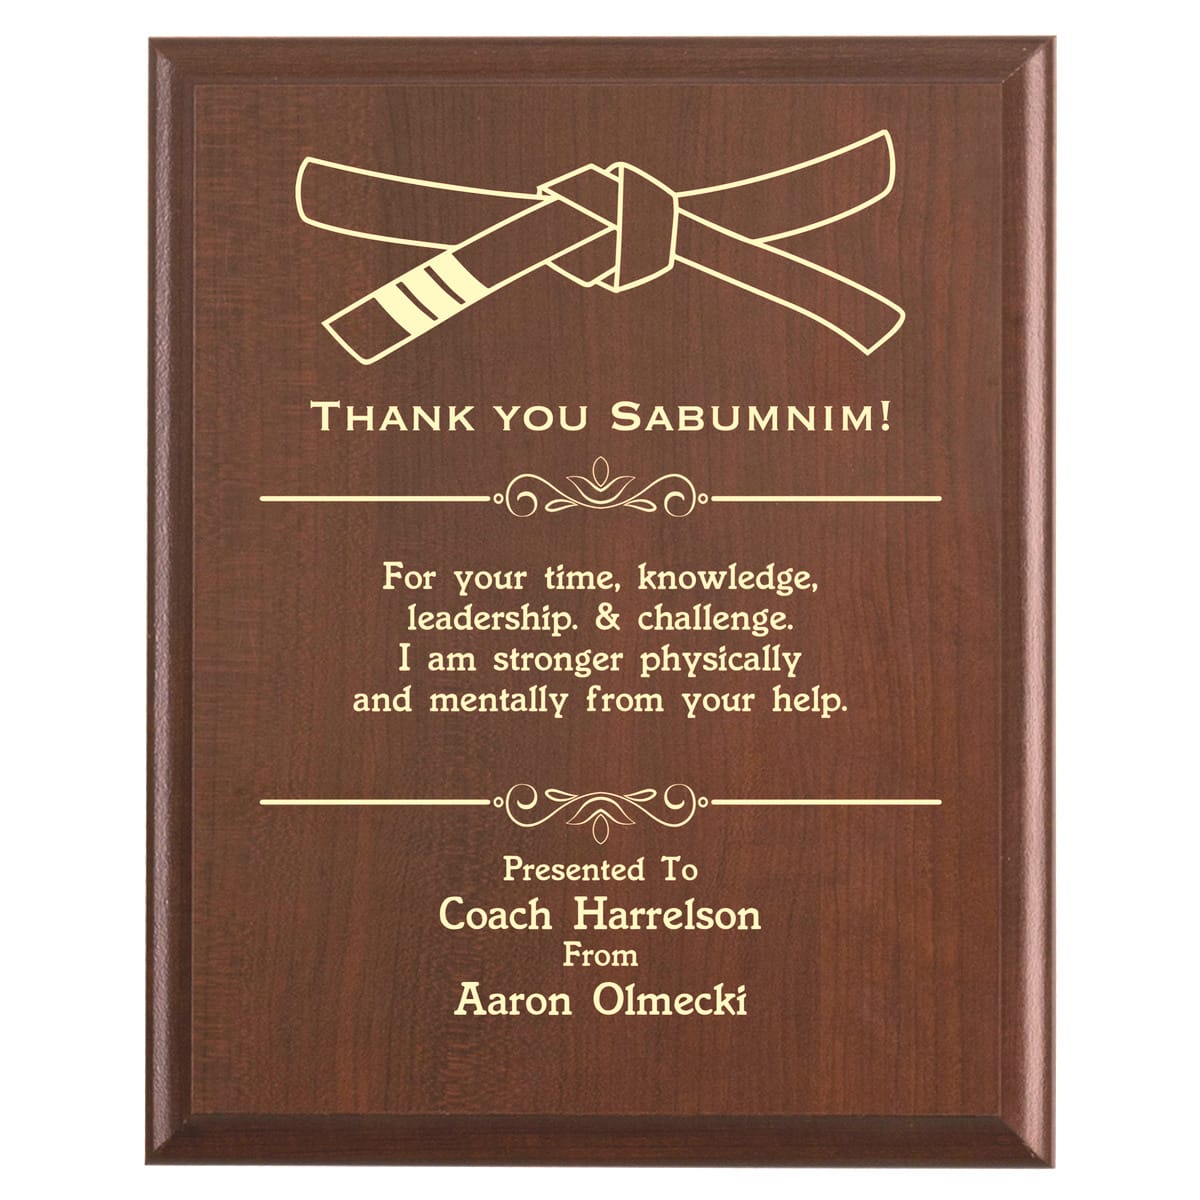 Plaque photo: Designed for a Great Sabumnim with free personalization. Wood style finish with customized text.